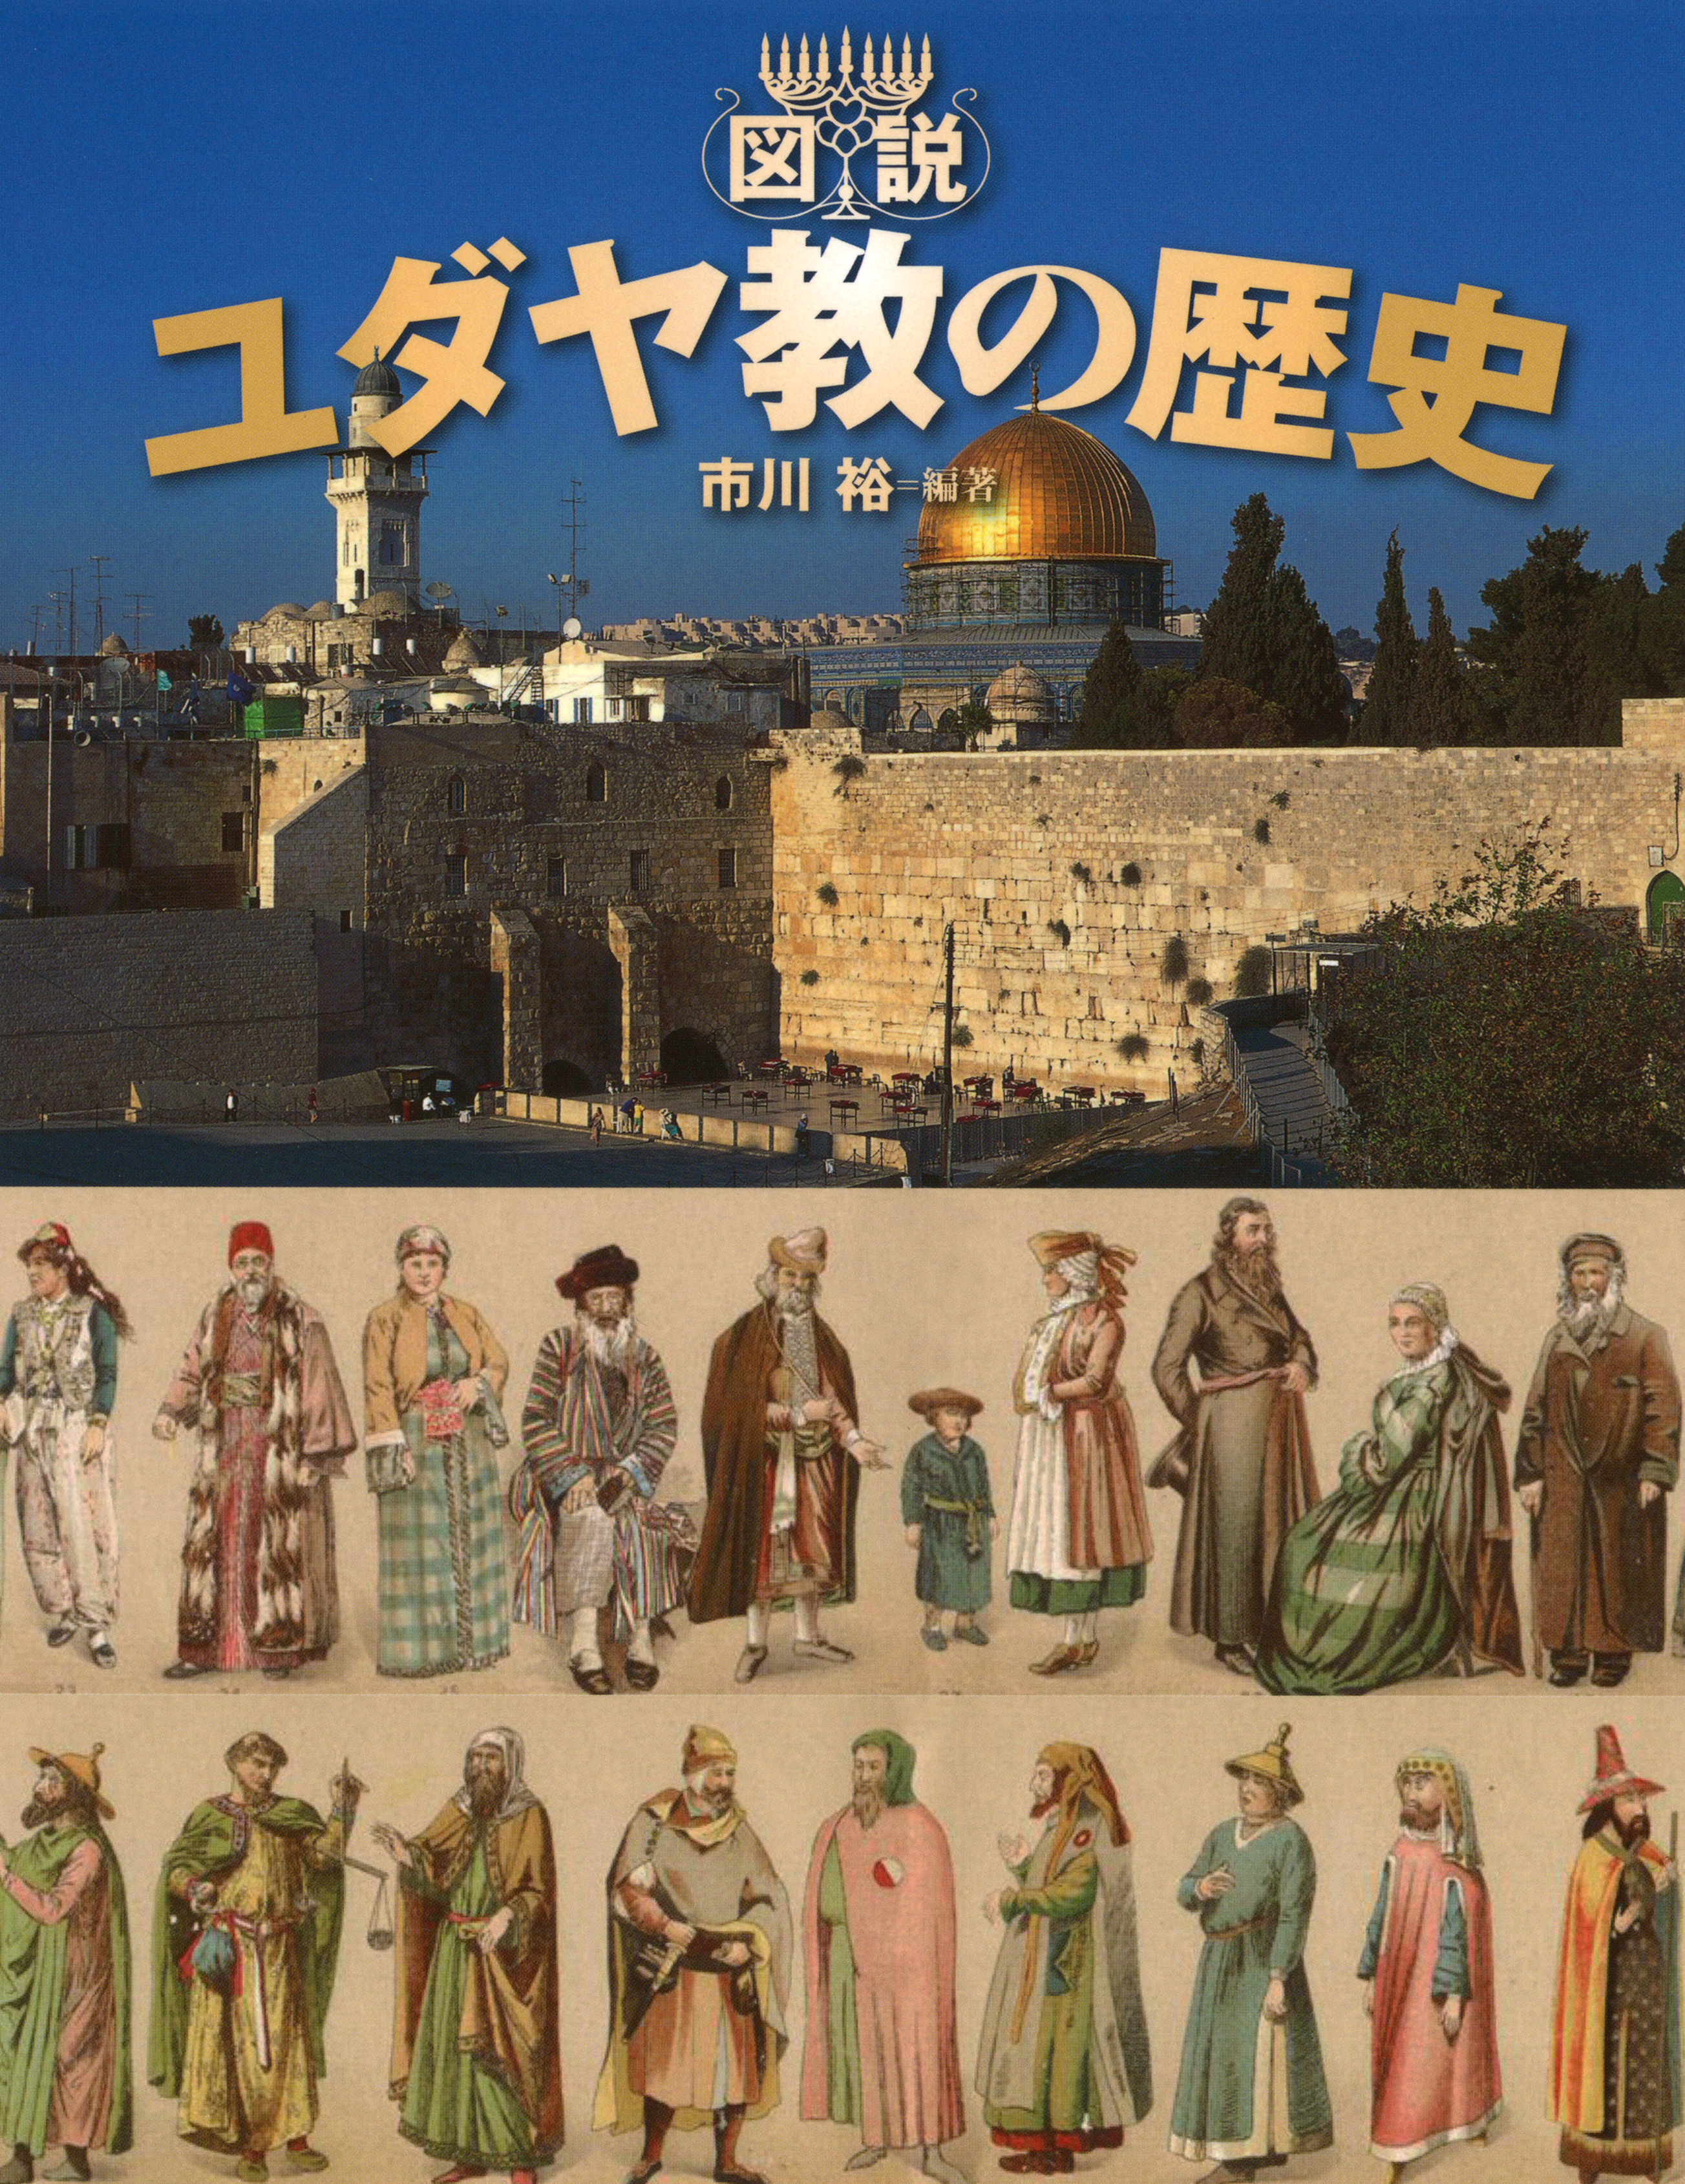 A picture of Jerusalem and an illustration of Judaist